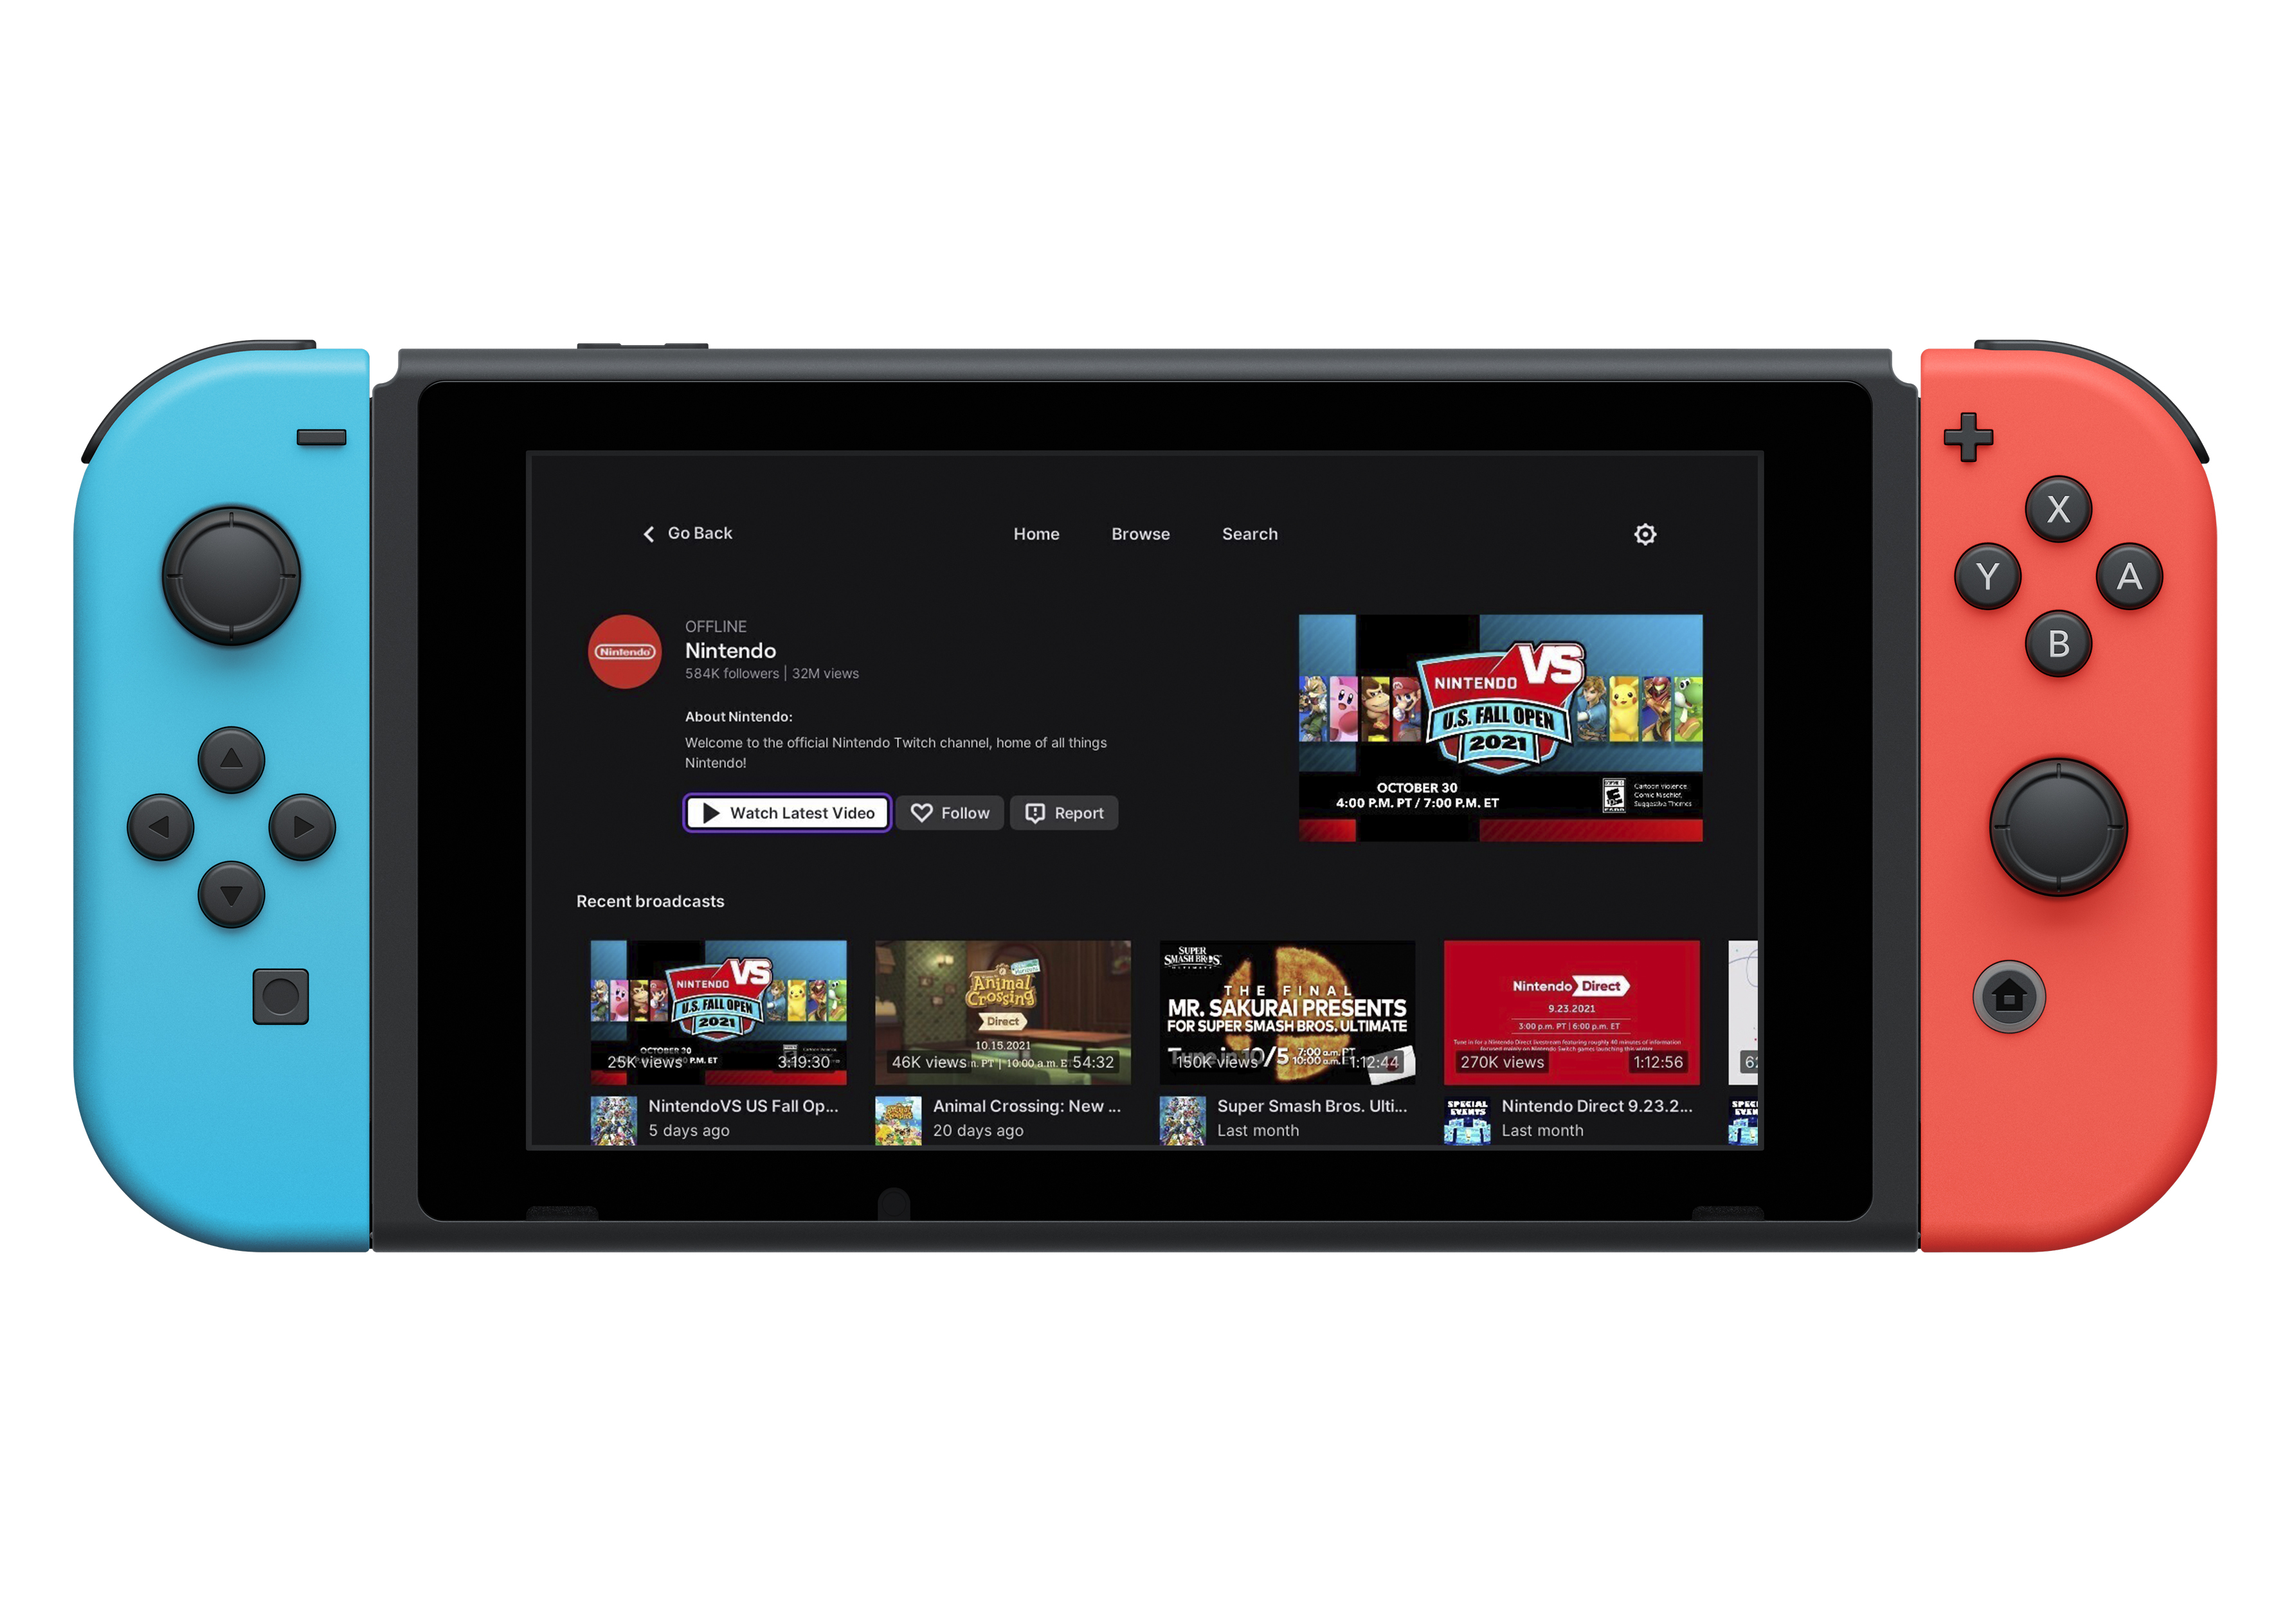 There’s Already A Pre-Order Listing For the Nintendo Switch 2 That You Should Definitely Avoid